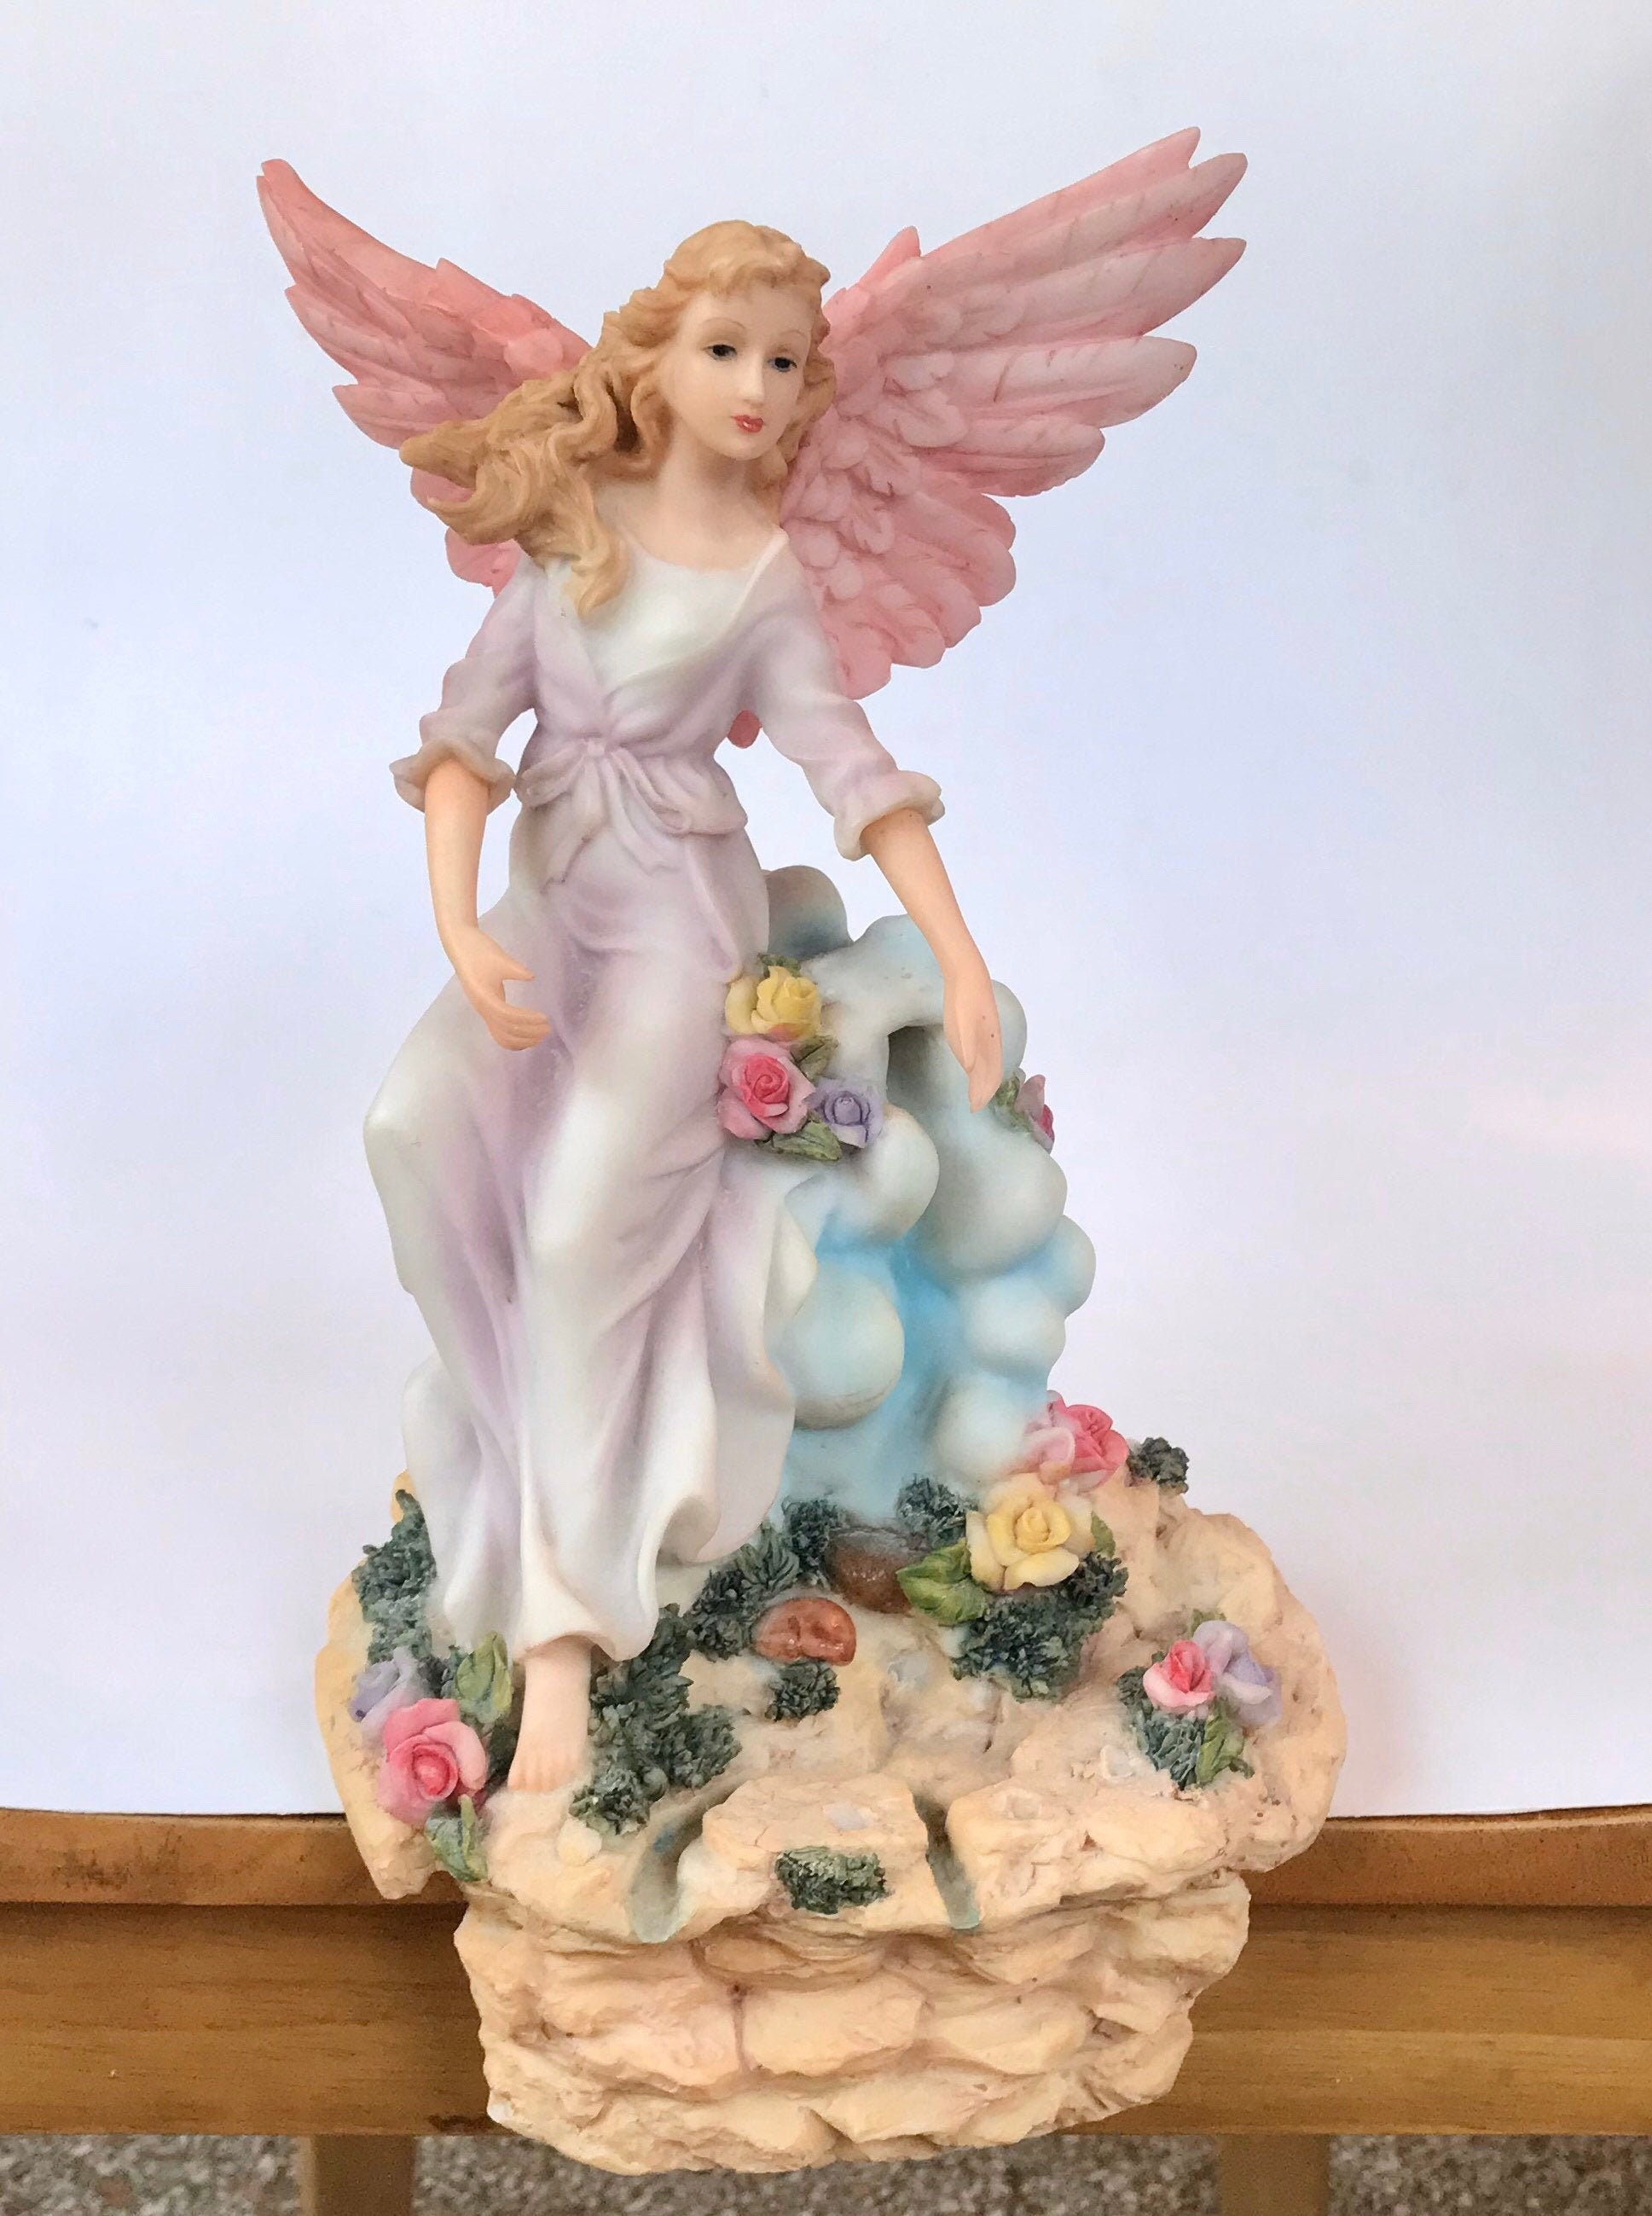 Vintage Large Angel Figurine resting on a Rock to put over shelf or mantel,  Guardian Angel Decor piece with Pink wings, angel statue decor.